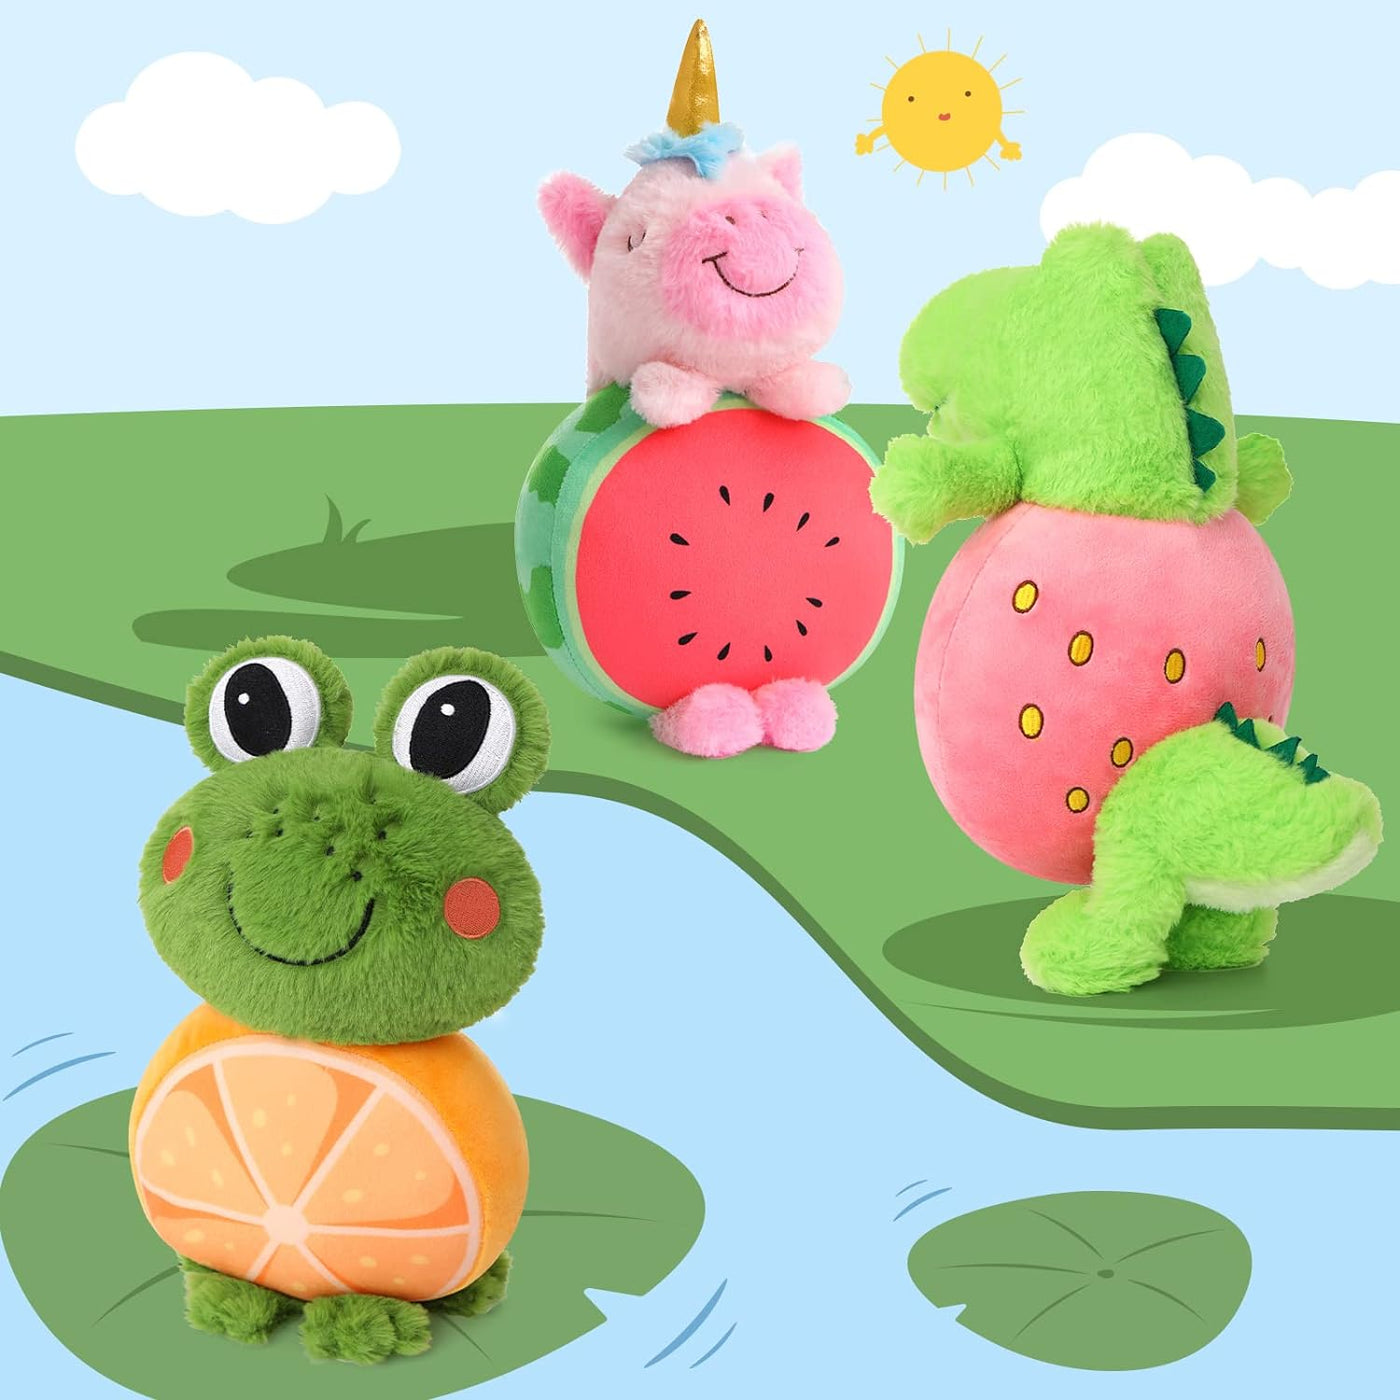 Cute Fruit Stuffed Animal Toy Set, 10.7 Inches